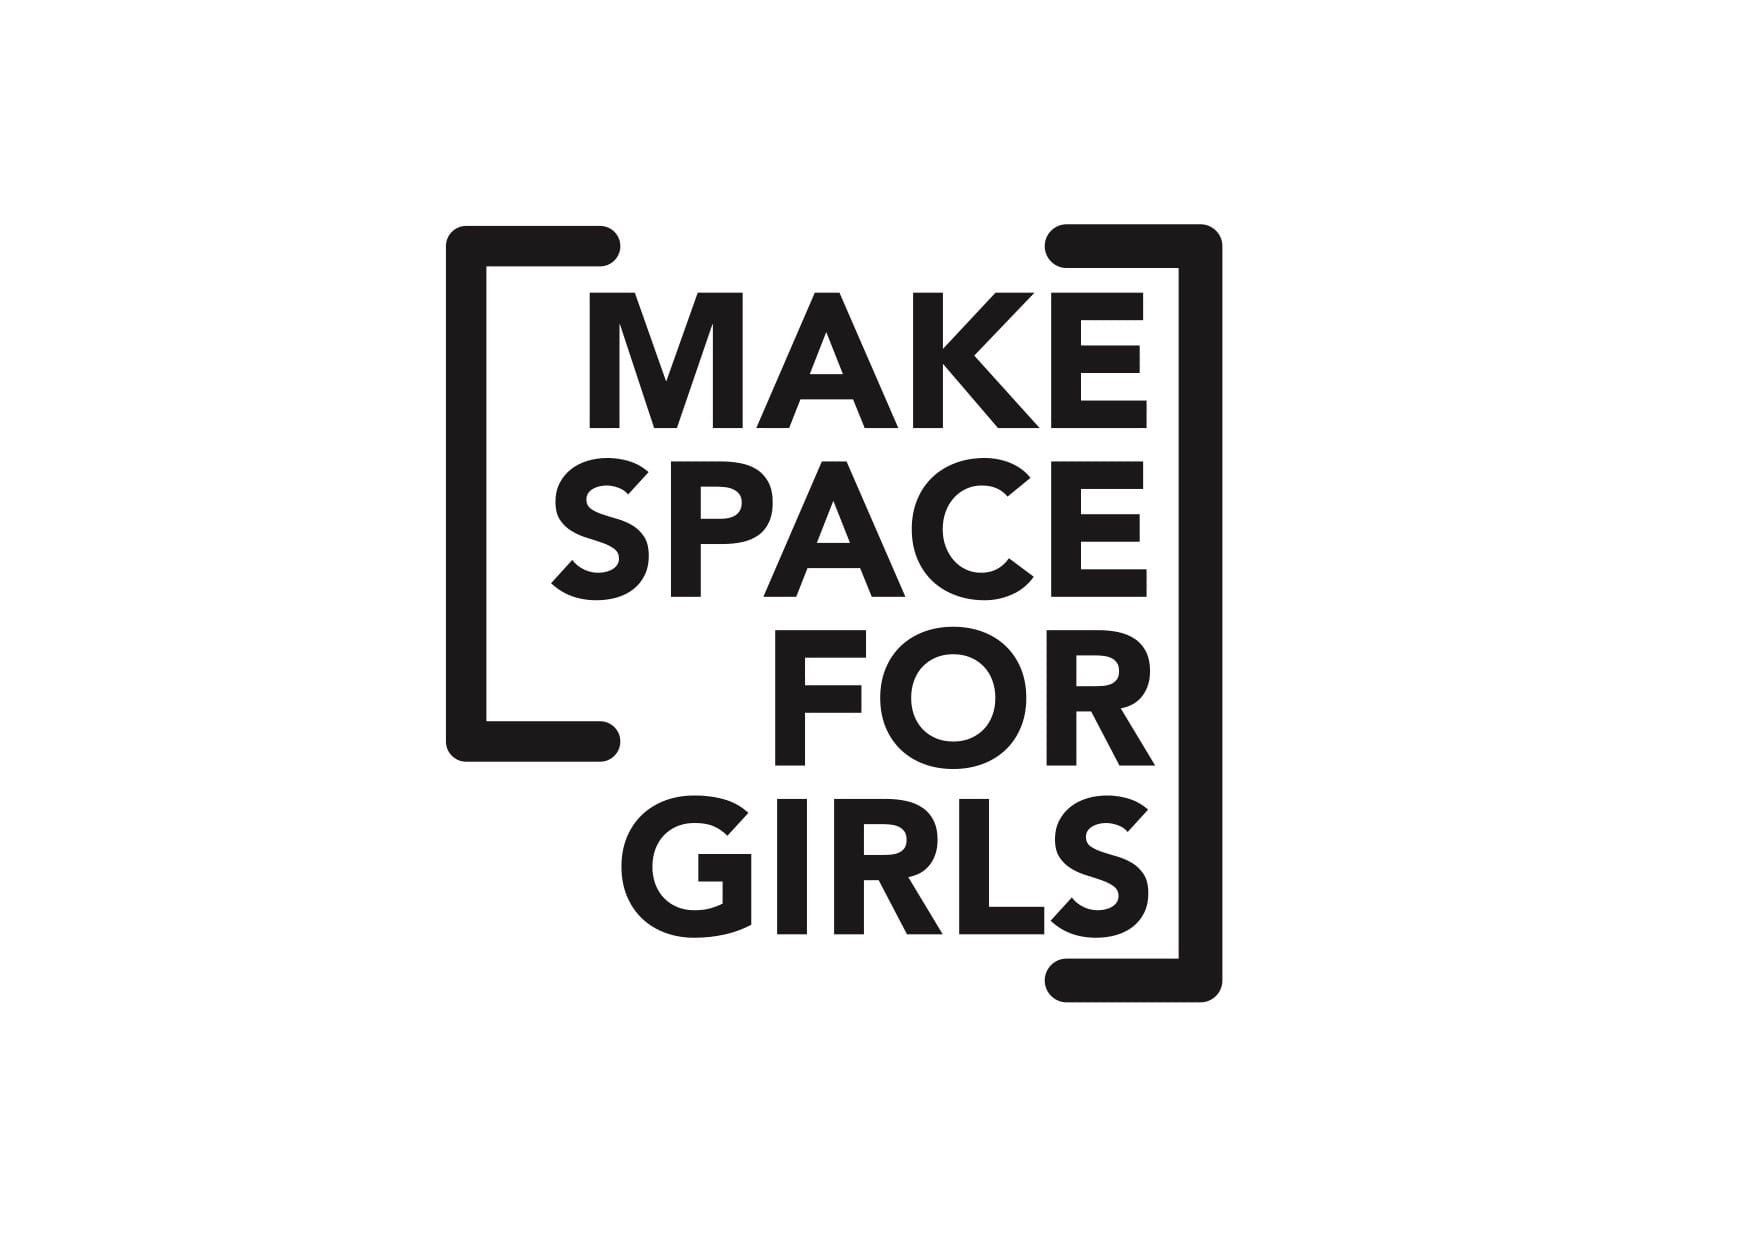 Make space for girls